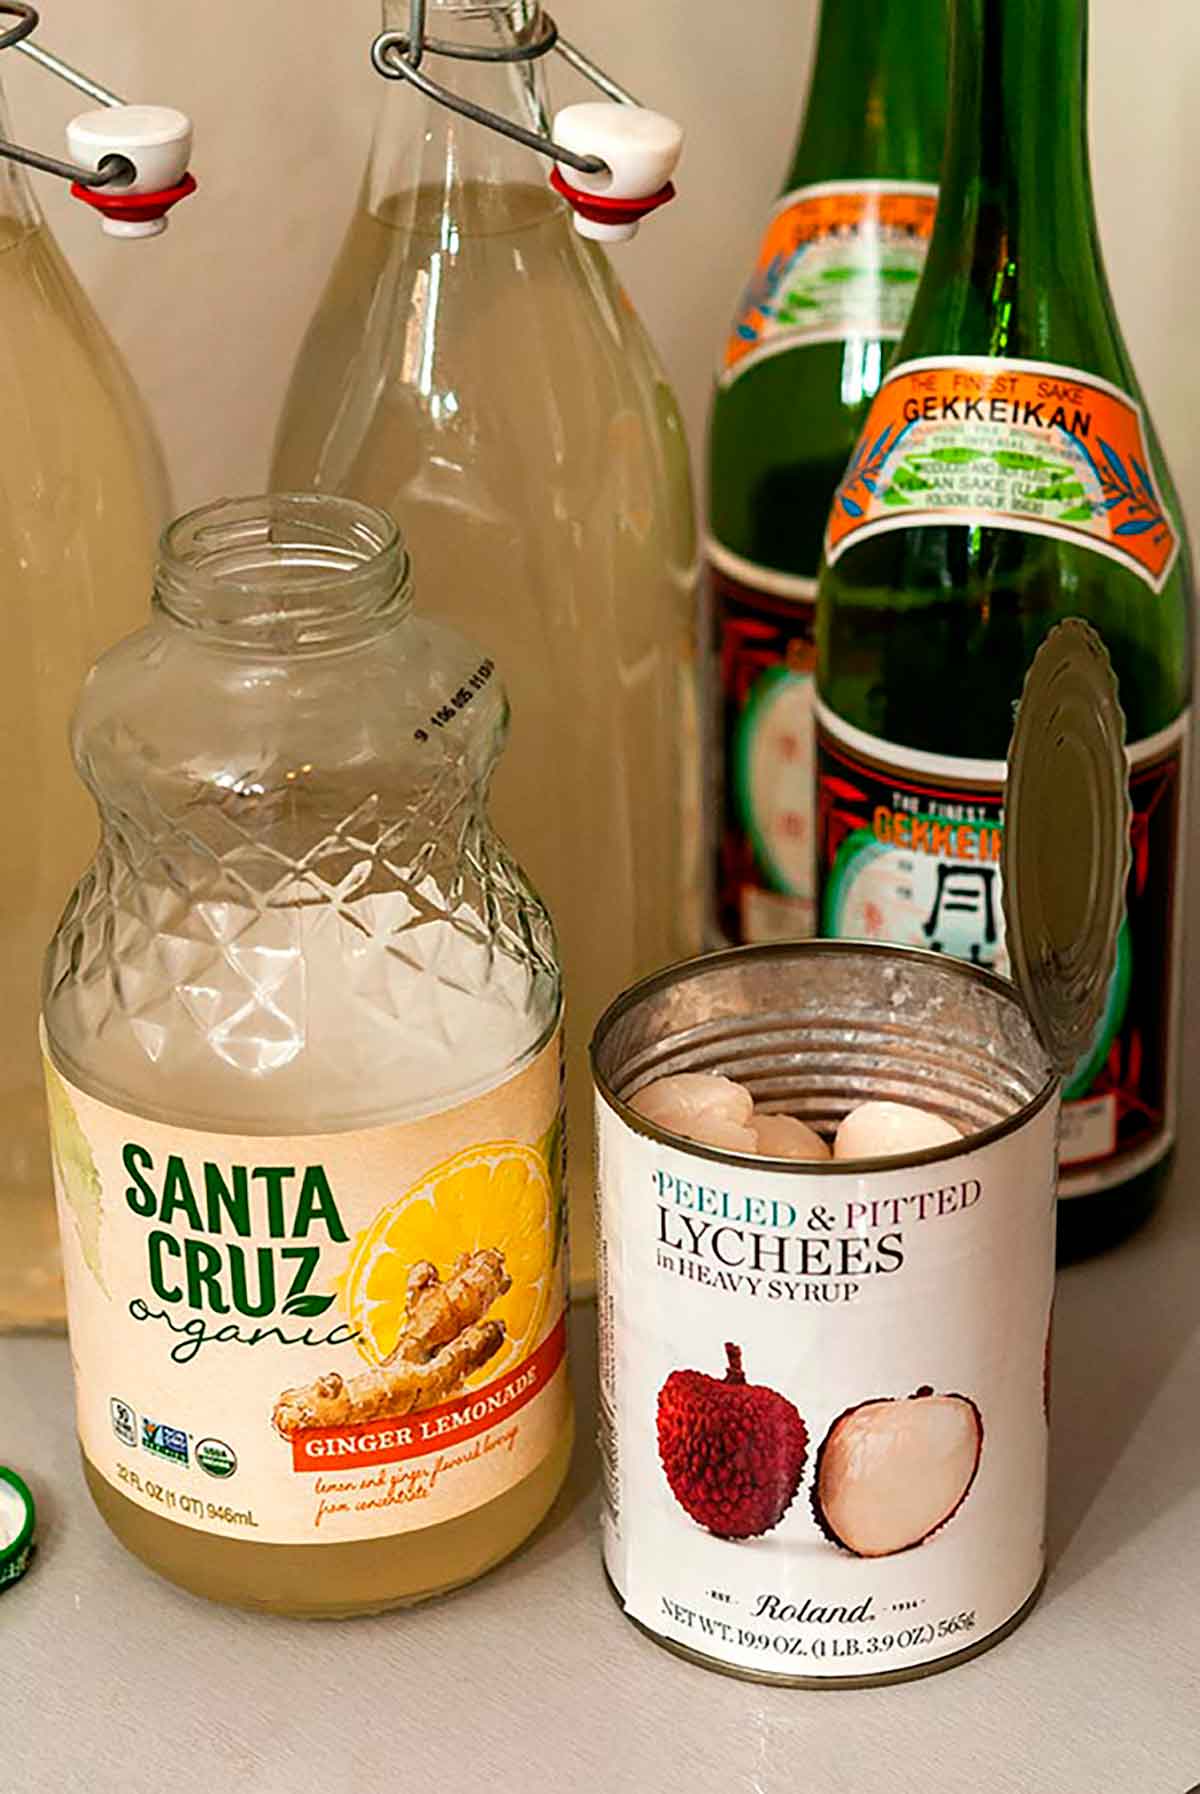 Sake, bottles of pre-mixed cocktails, a bottle of ginger lemonade and an open can of lychees on a table.